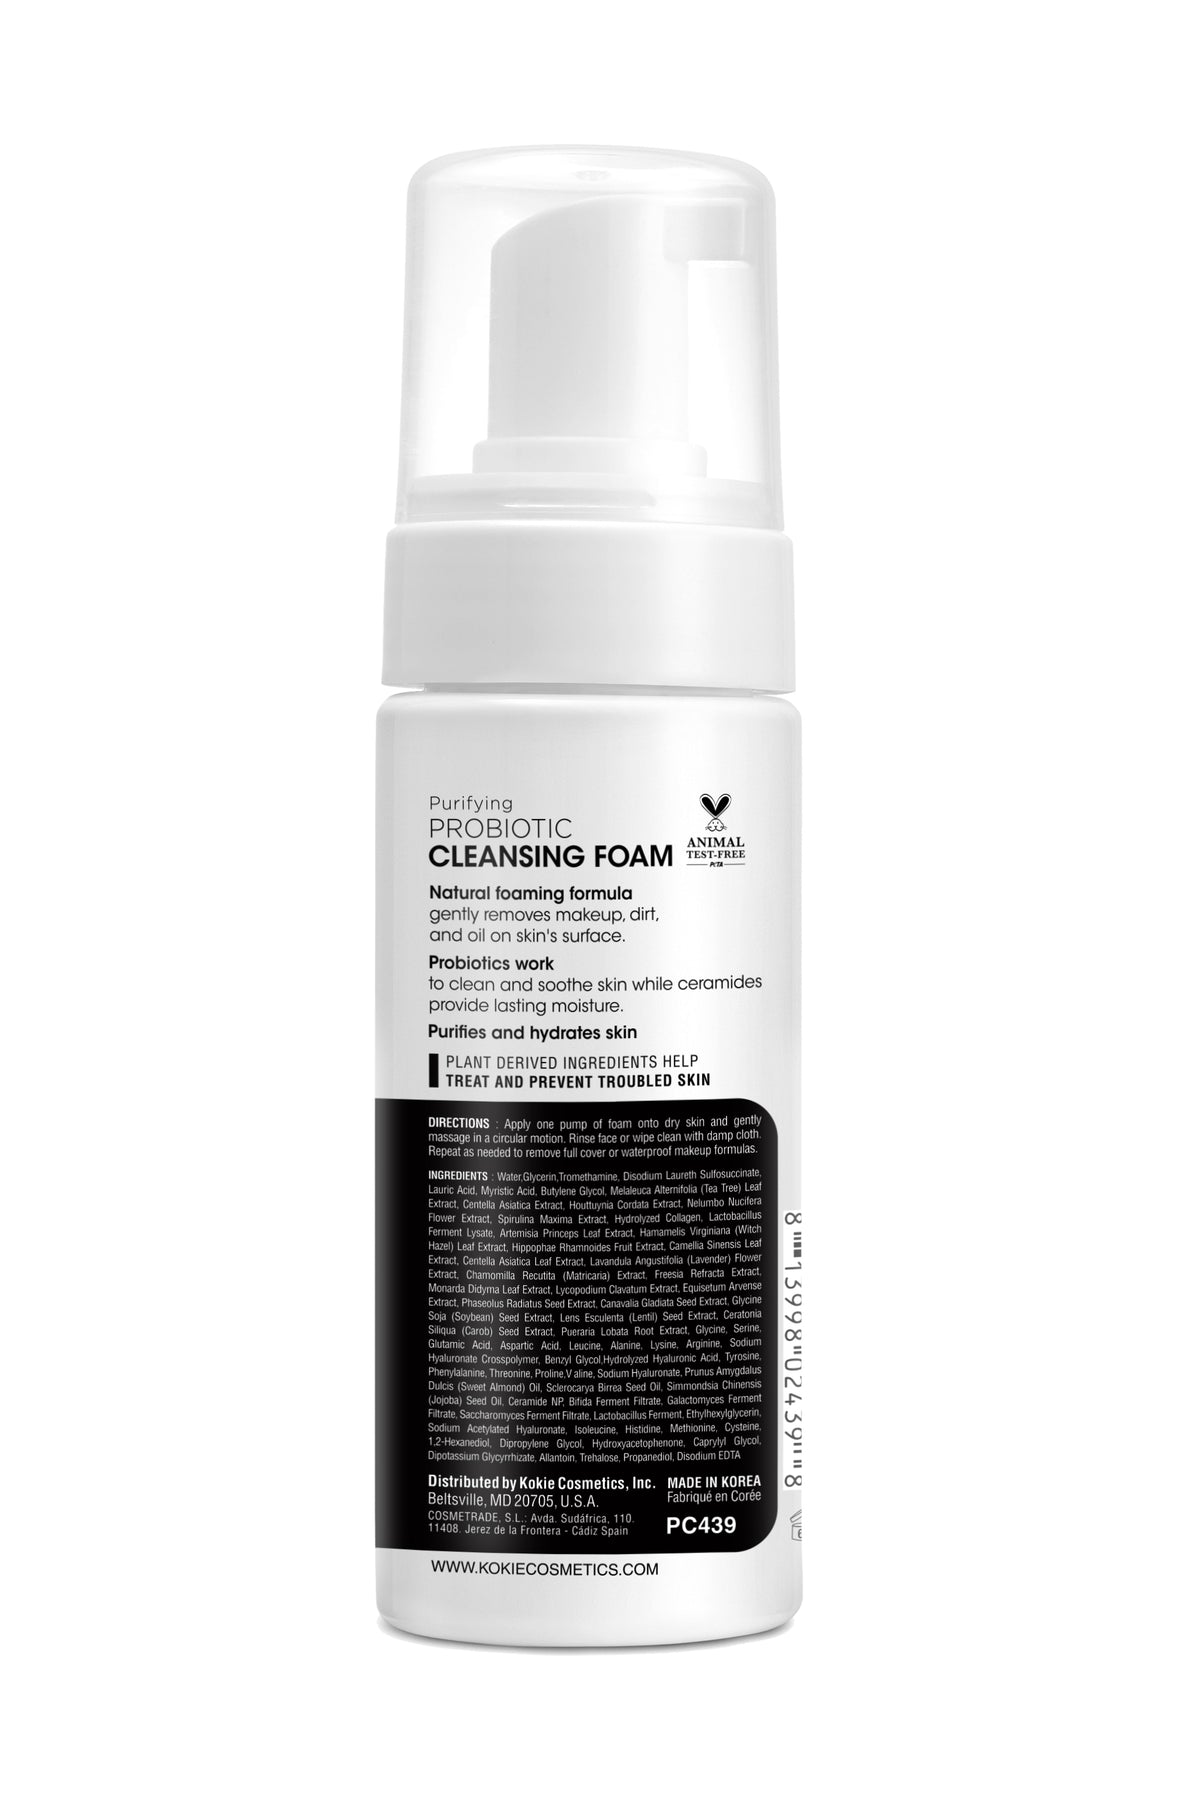 PURIFYING PROBIOTIC CLEANSING FOAM